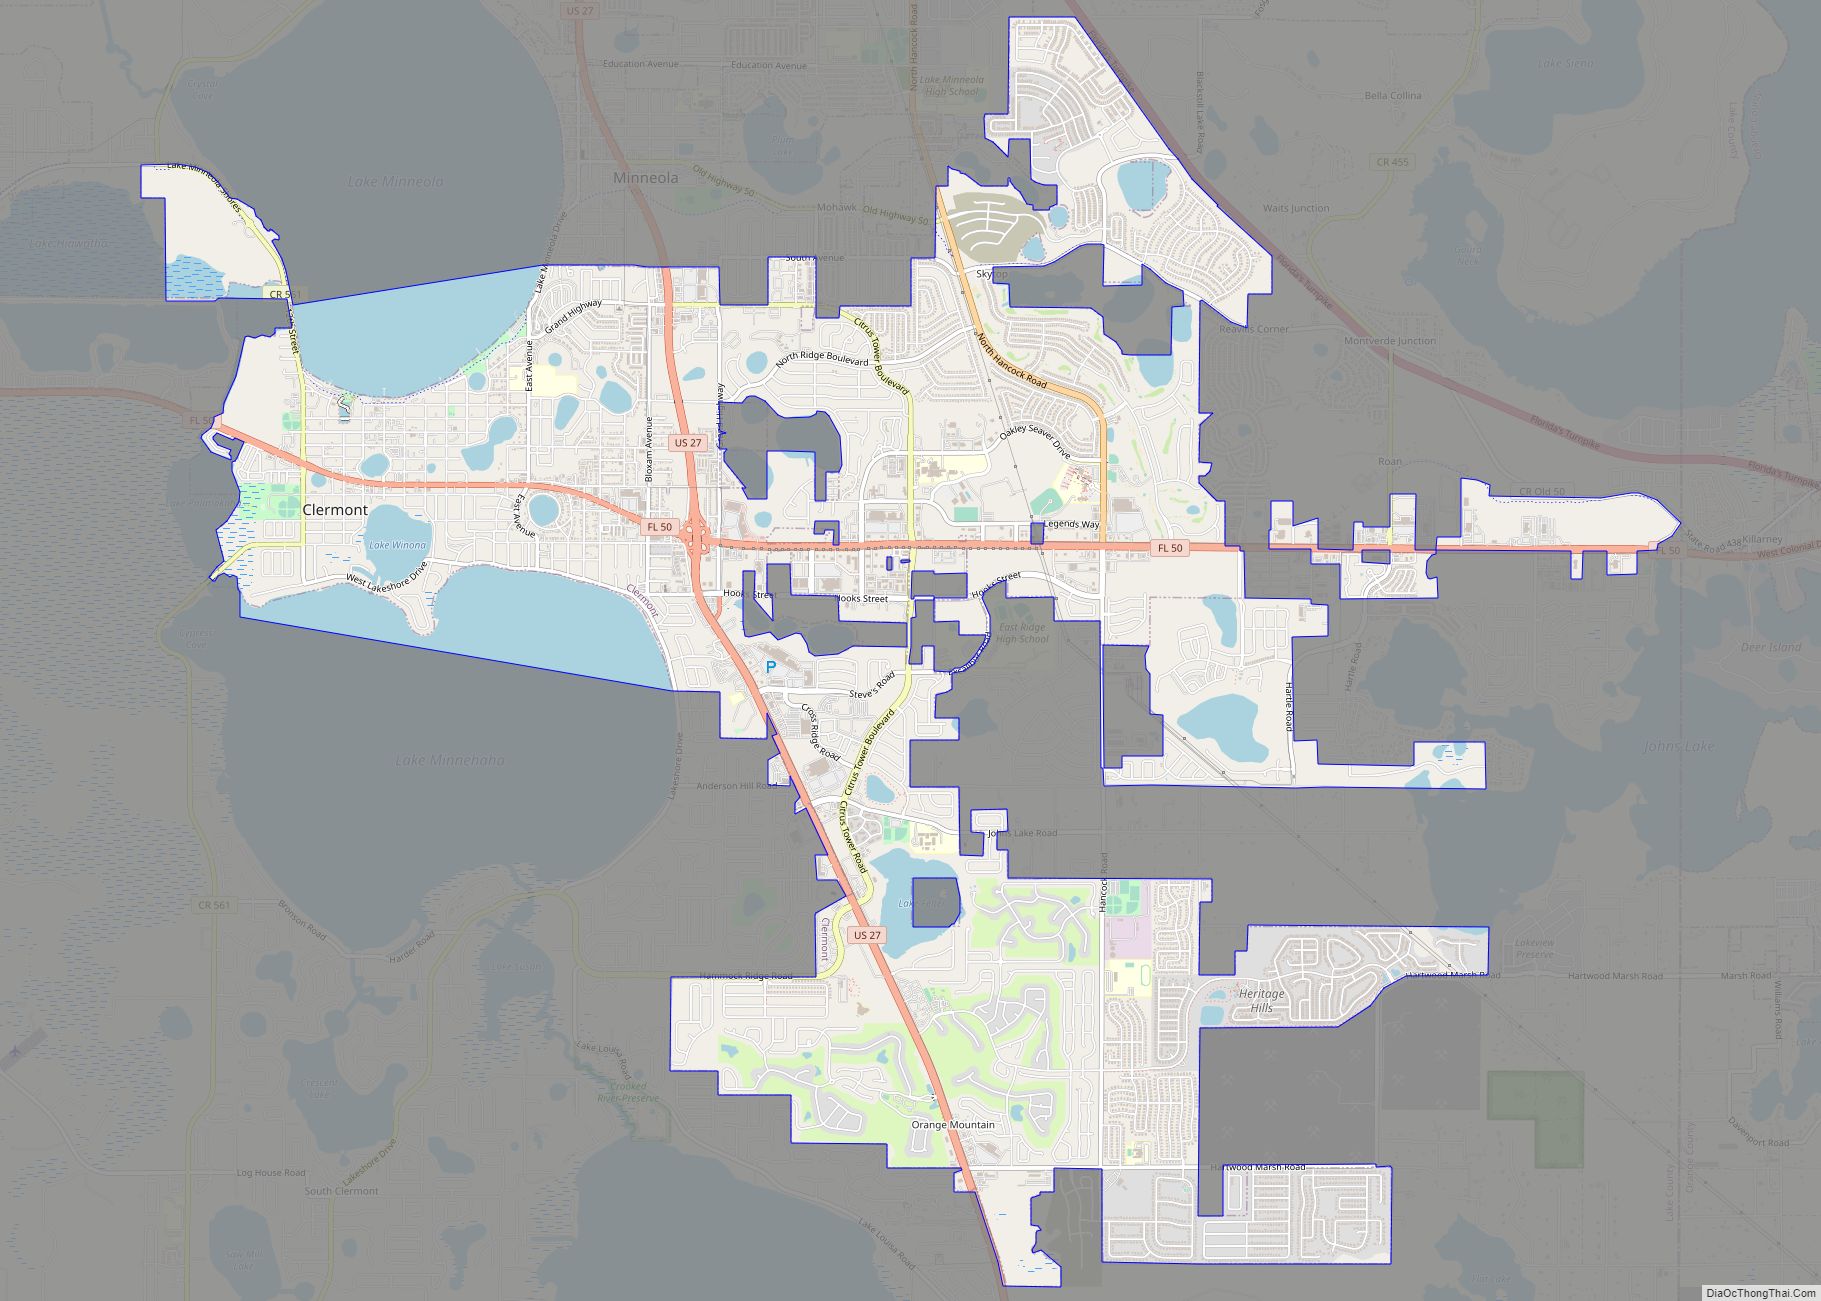 Map of Clermont city